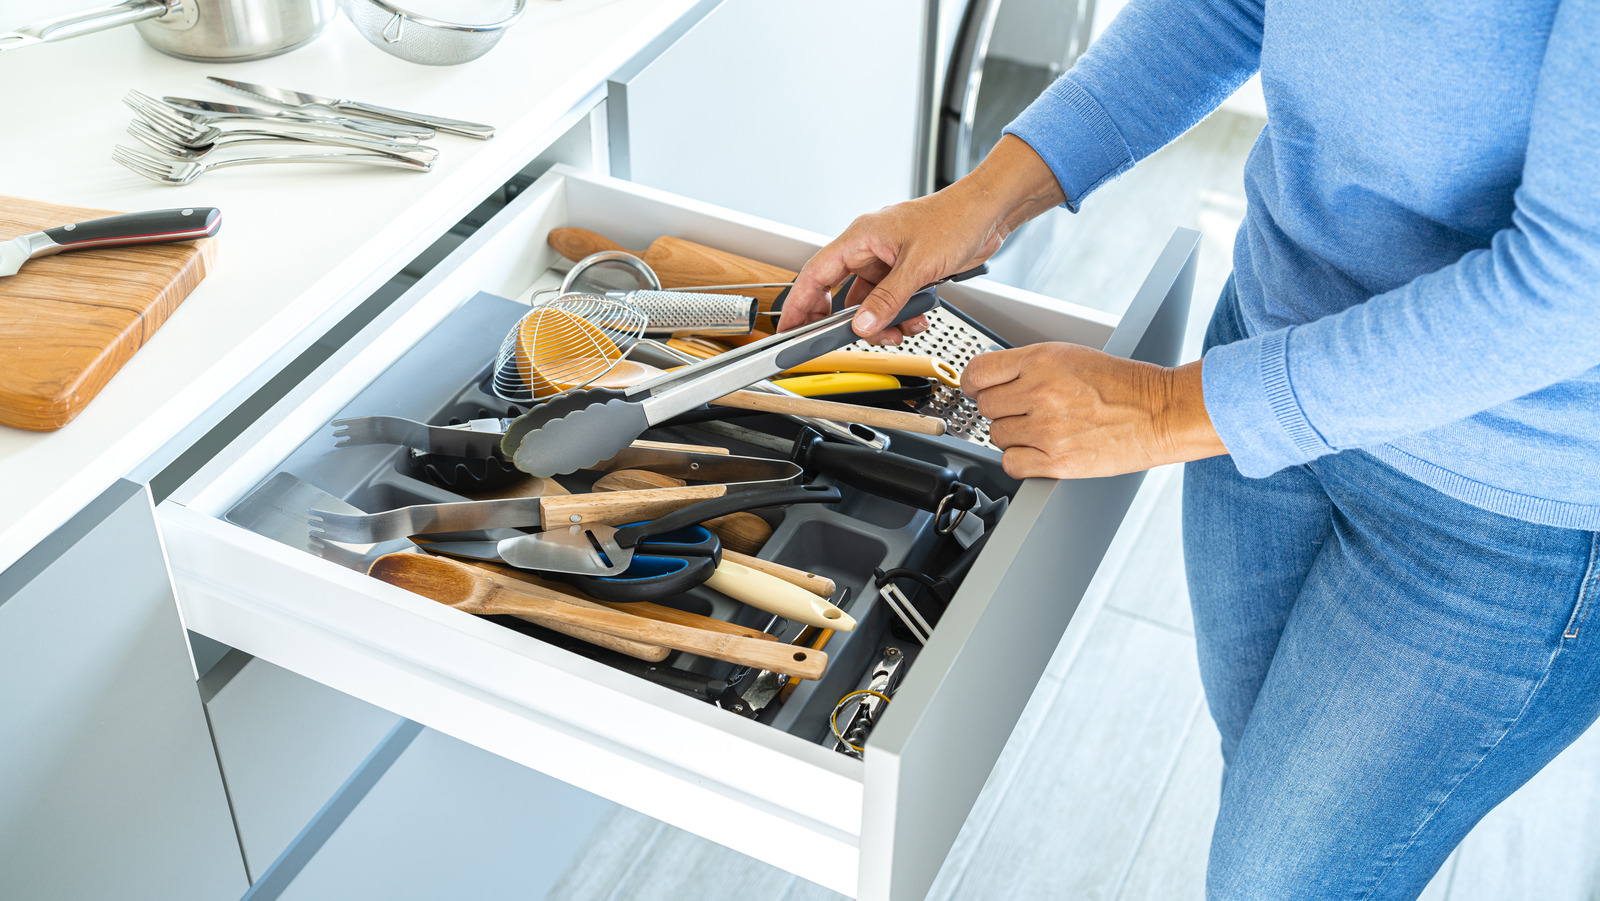 Kitchen Hacks to Organize and Make Your Kitchen Flow Better